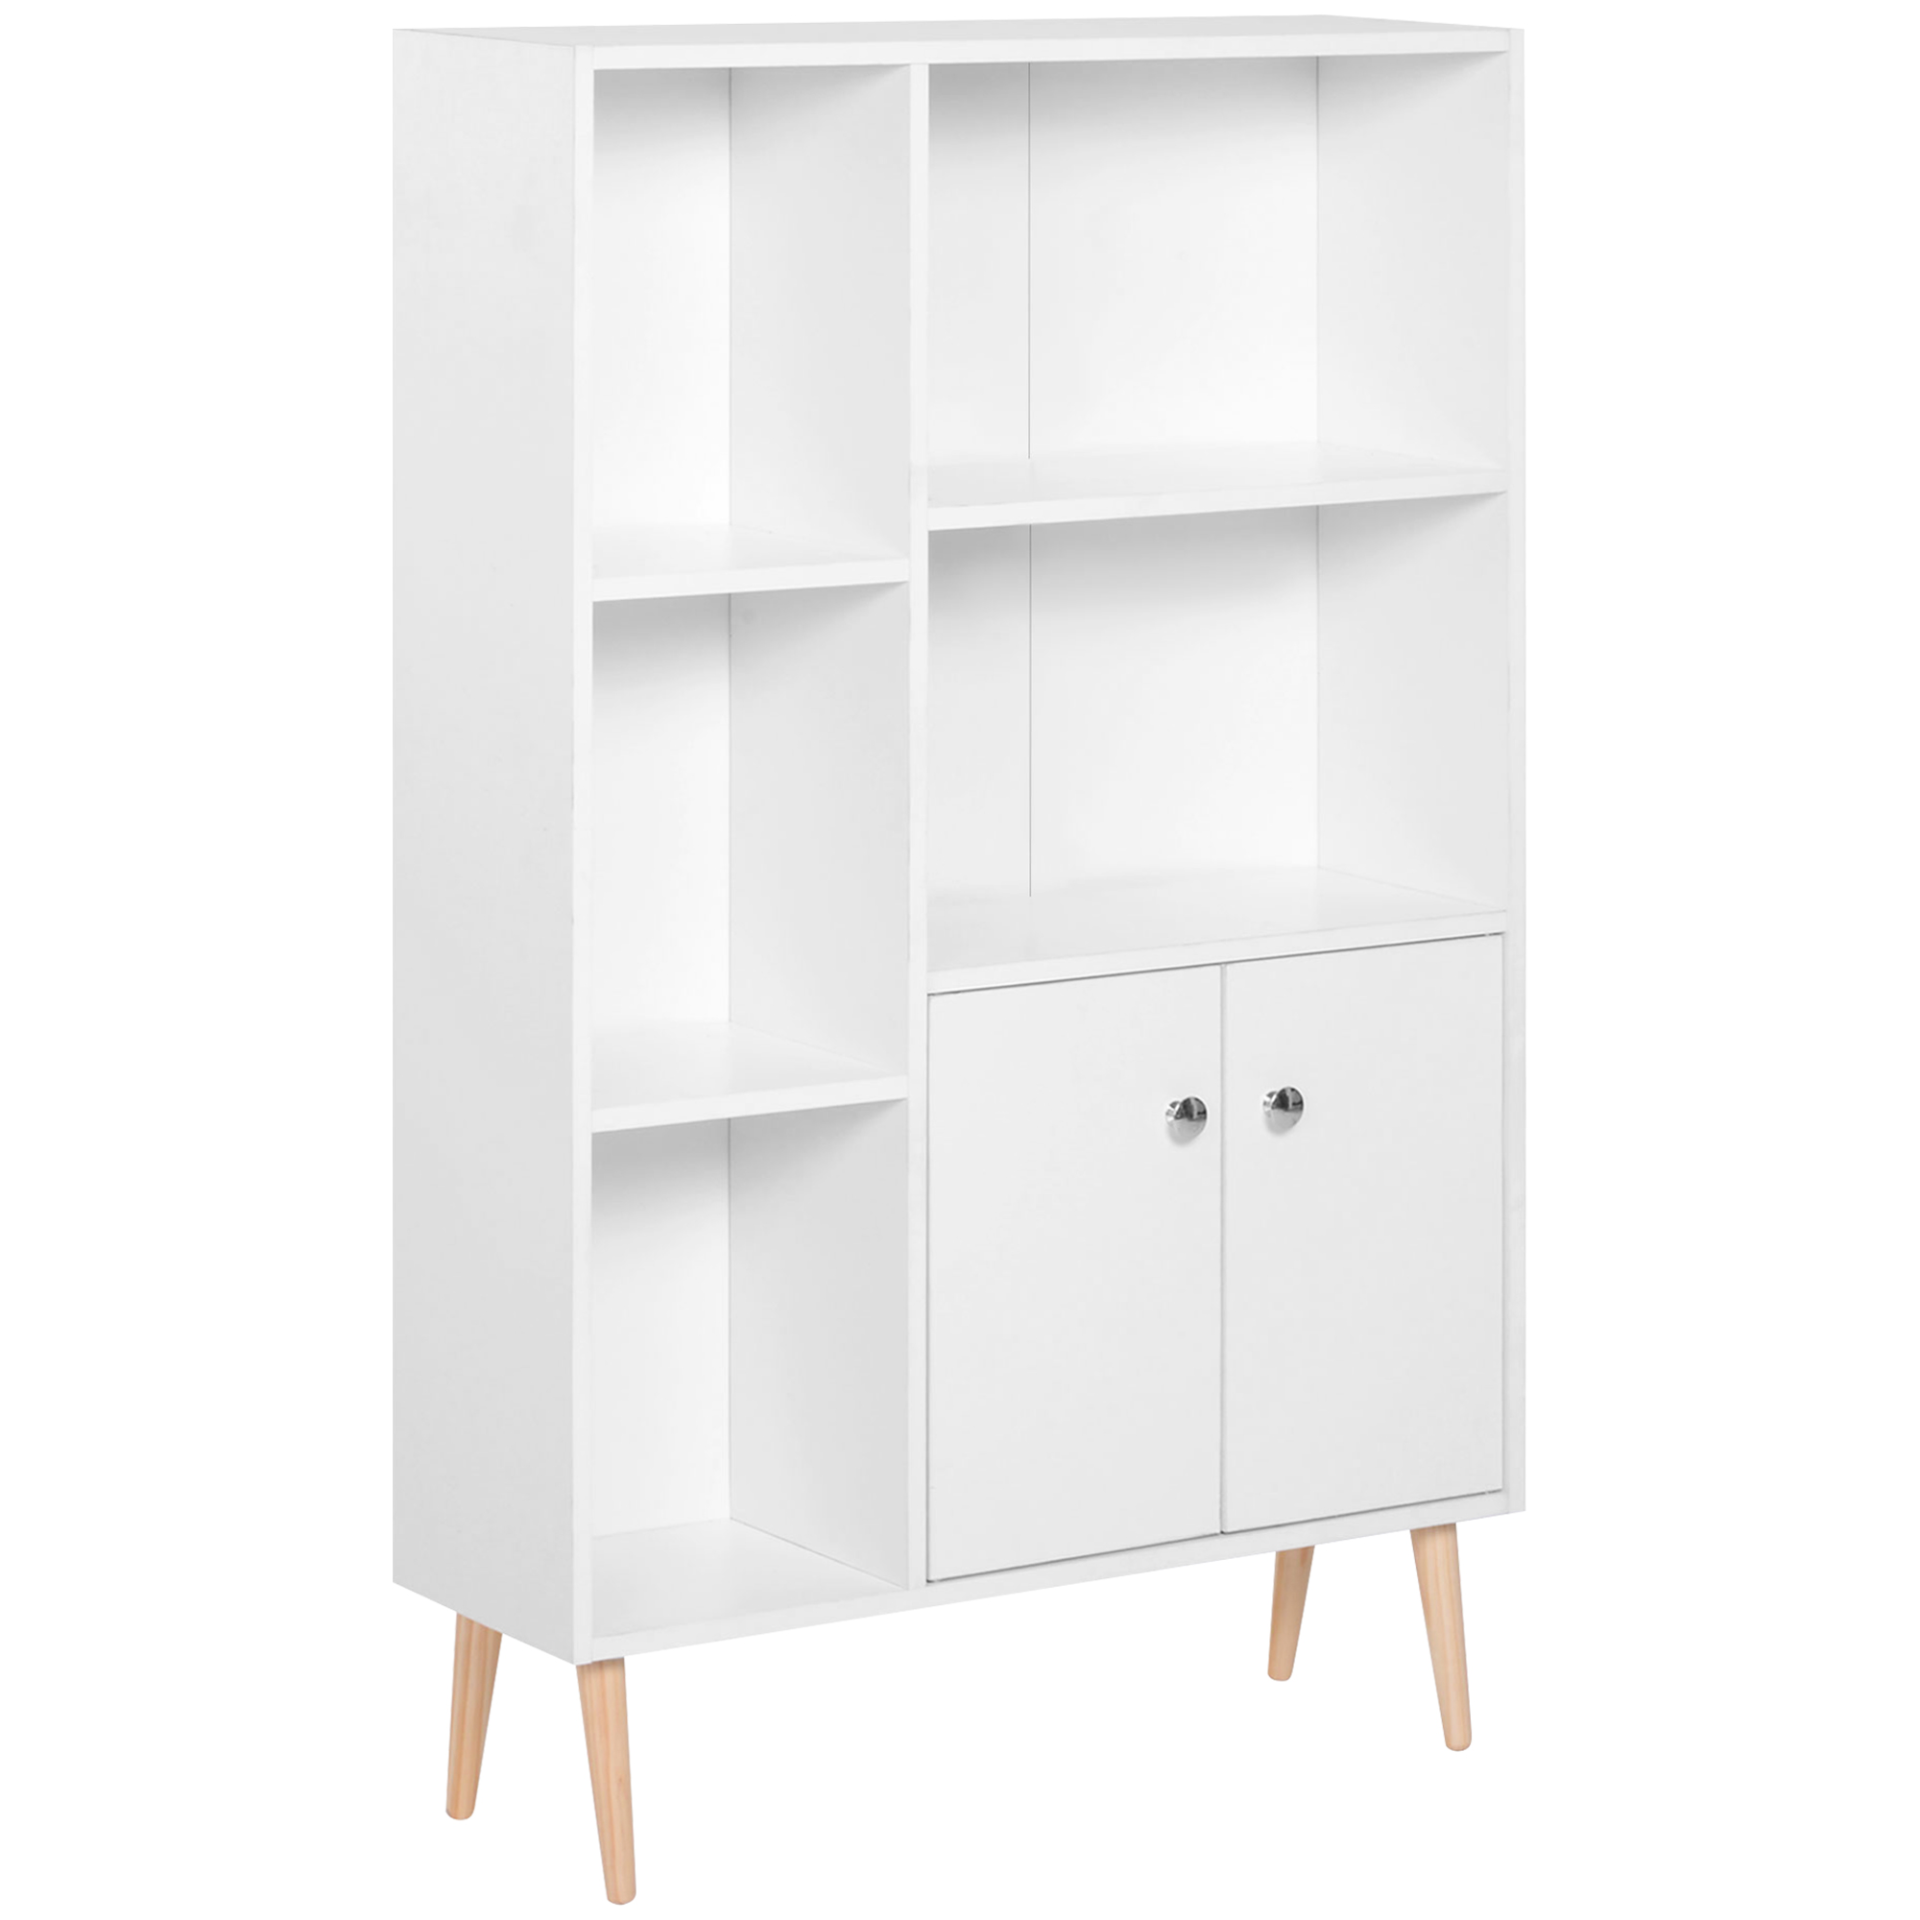 HOMCOM Open Bookcase Storage Cabinet Shelves Unit Free Standing w/ Two Doors Wooden Display White